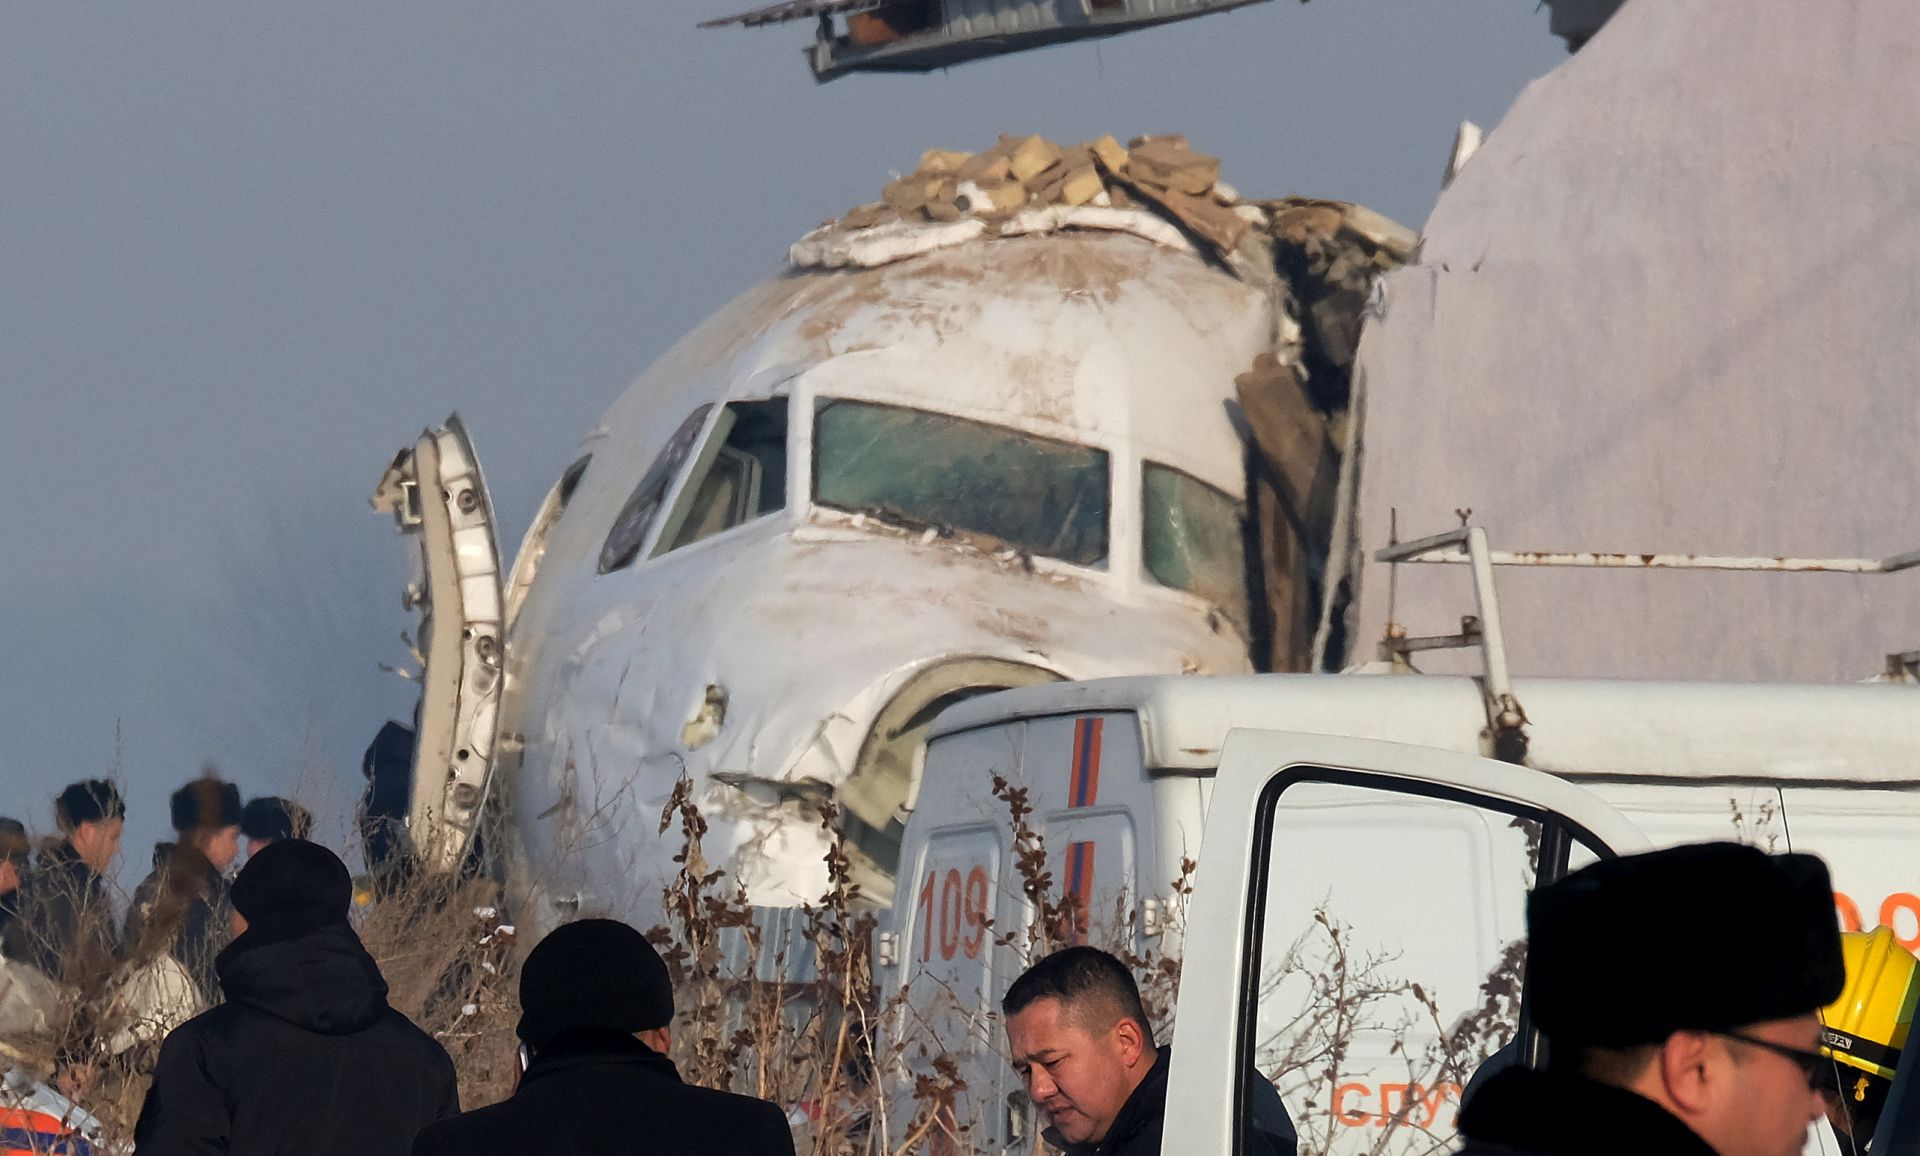 epa08091526 Rescuers work at the site of an airplane crash near Almaty airport, some 20km from the city of Almaty, Kazakhstan, 27 December 2019. According to media reports, at least 14 people have died and over 60 were injured after a Bek Air's Fokker 100 passenger plane with around 100 people on board crashed shortly after taking off from Almaty airport. The flight was en-route from Almaty, the country's largest city, to the capital Nur-Sultan. The cause of the incident is yet unknown.  EPA/VLADIMIR ZAIKIN